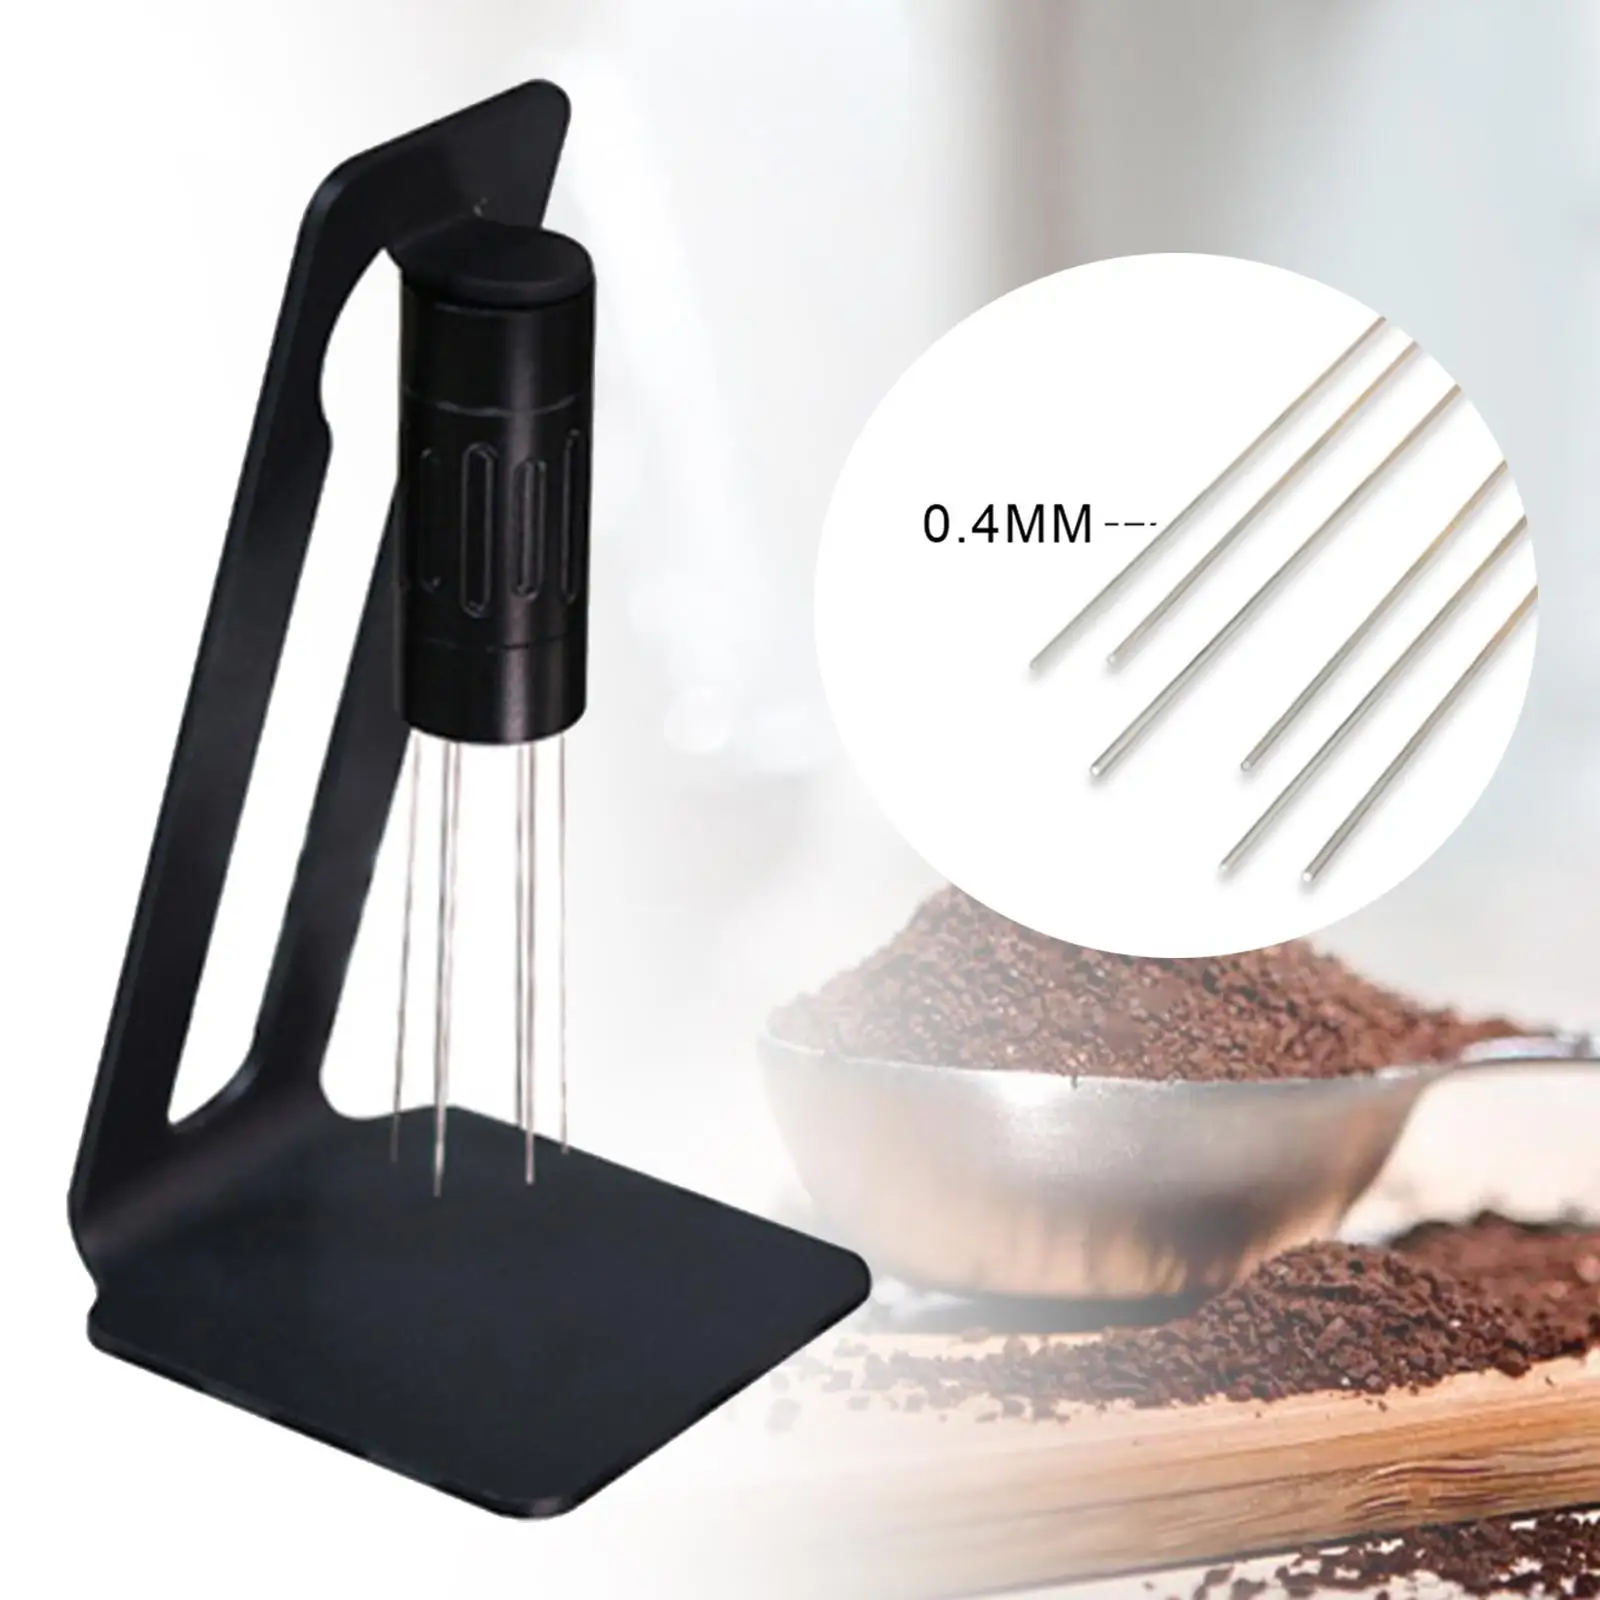 Espresso Stirrer Practical Coffee Pin Dispenser 6 Pins Coffee Ground Needle Distributor for Espresso Accessories Home Daily Use